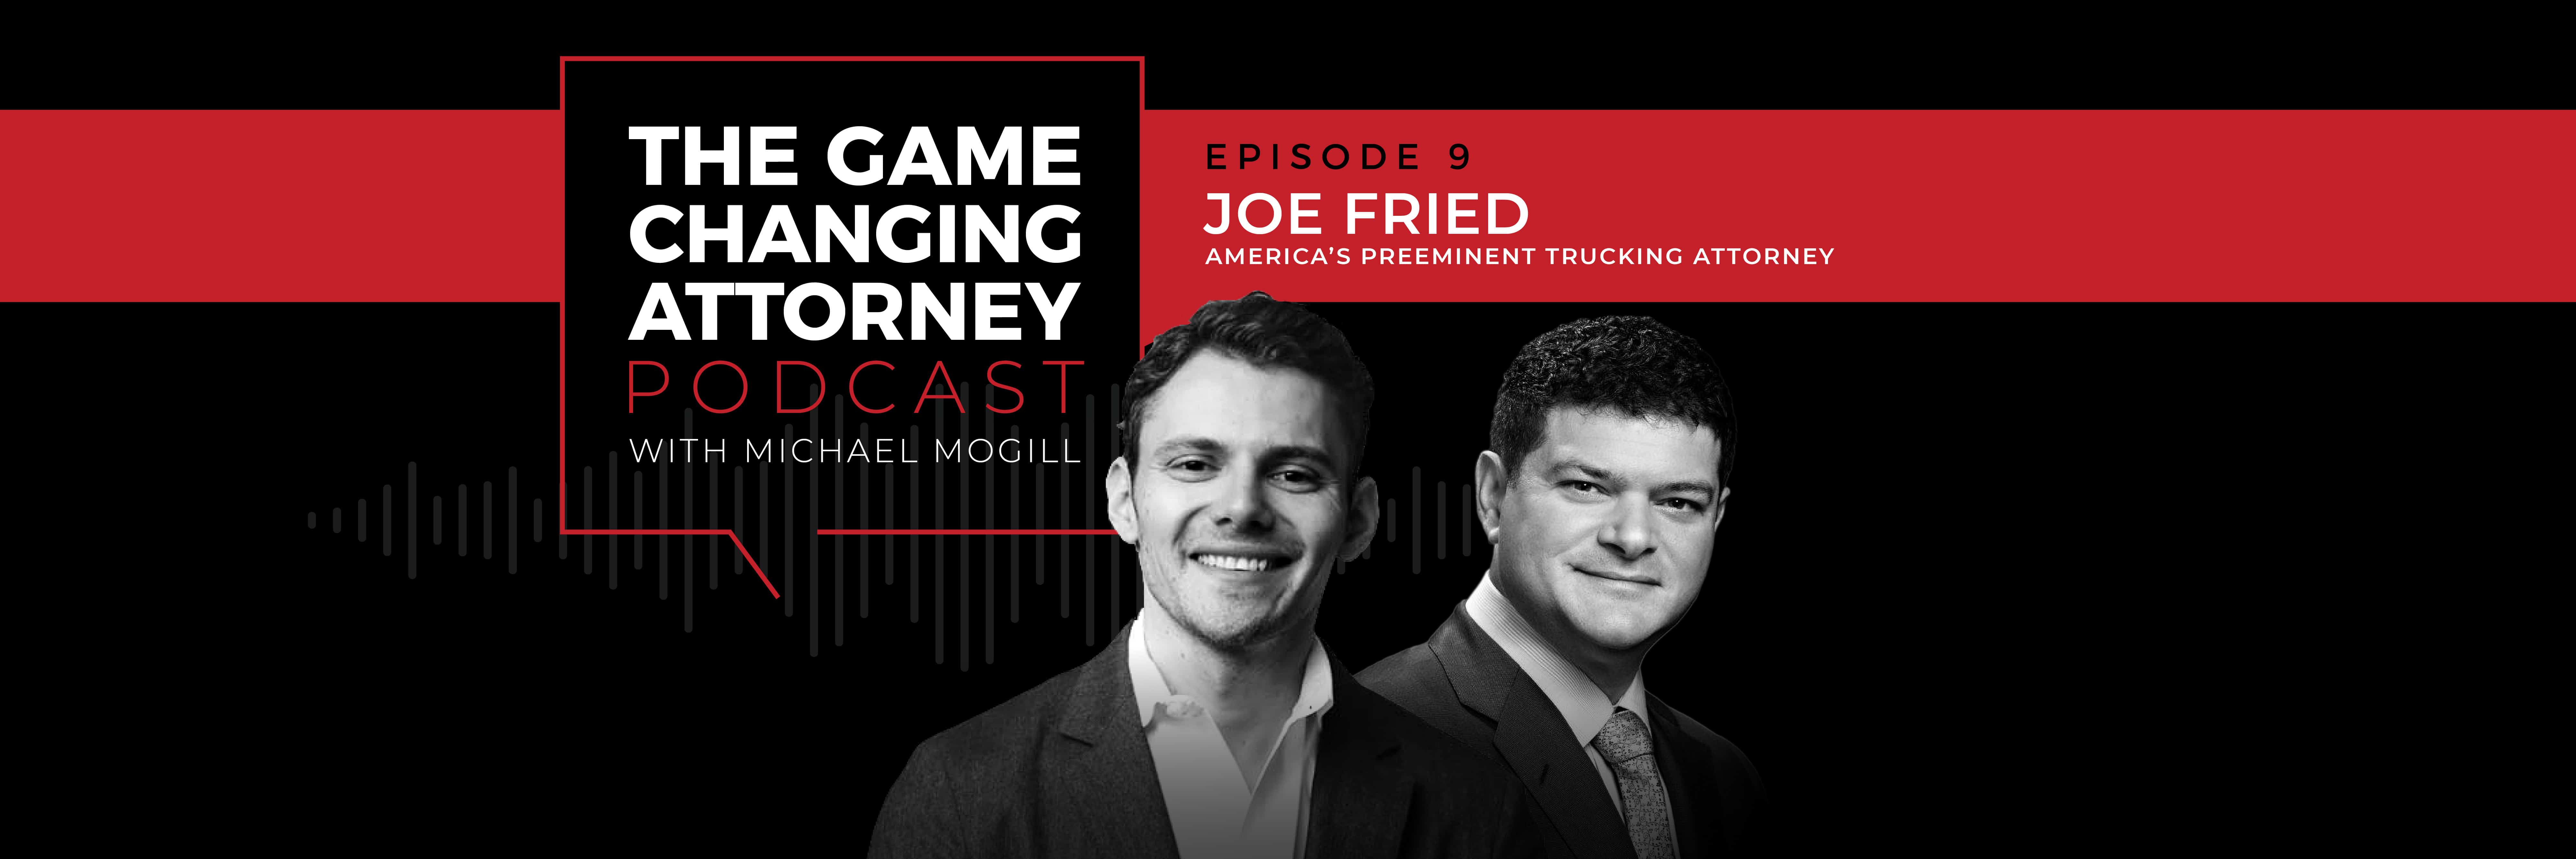 Joe Fried - The Game Changing Attorney Podcast - Desktop